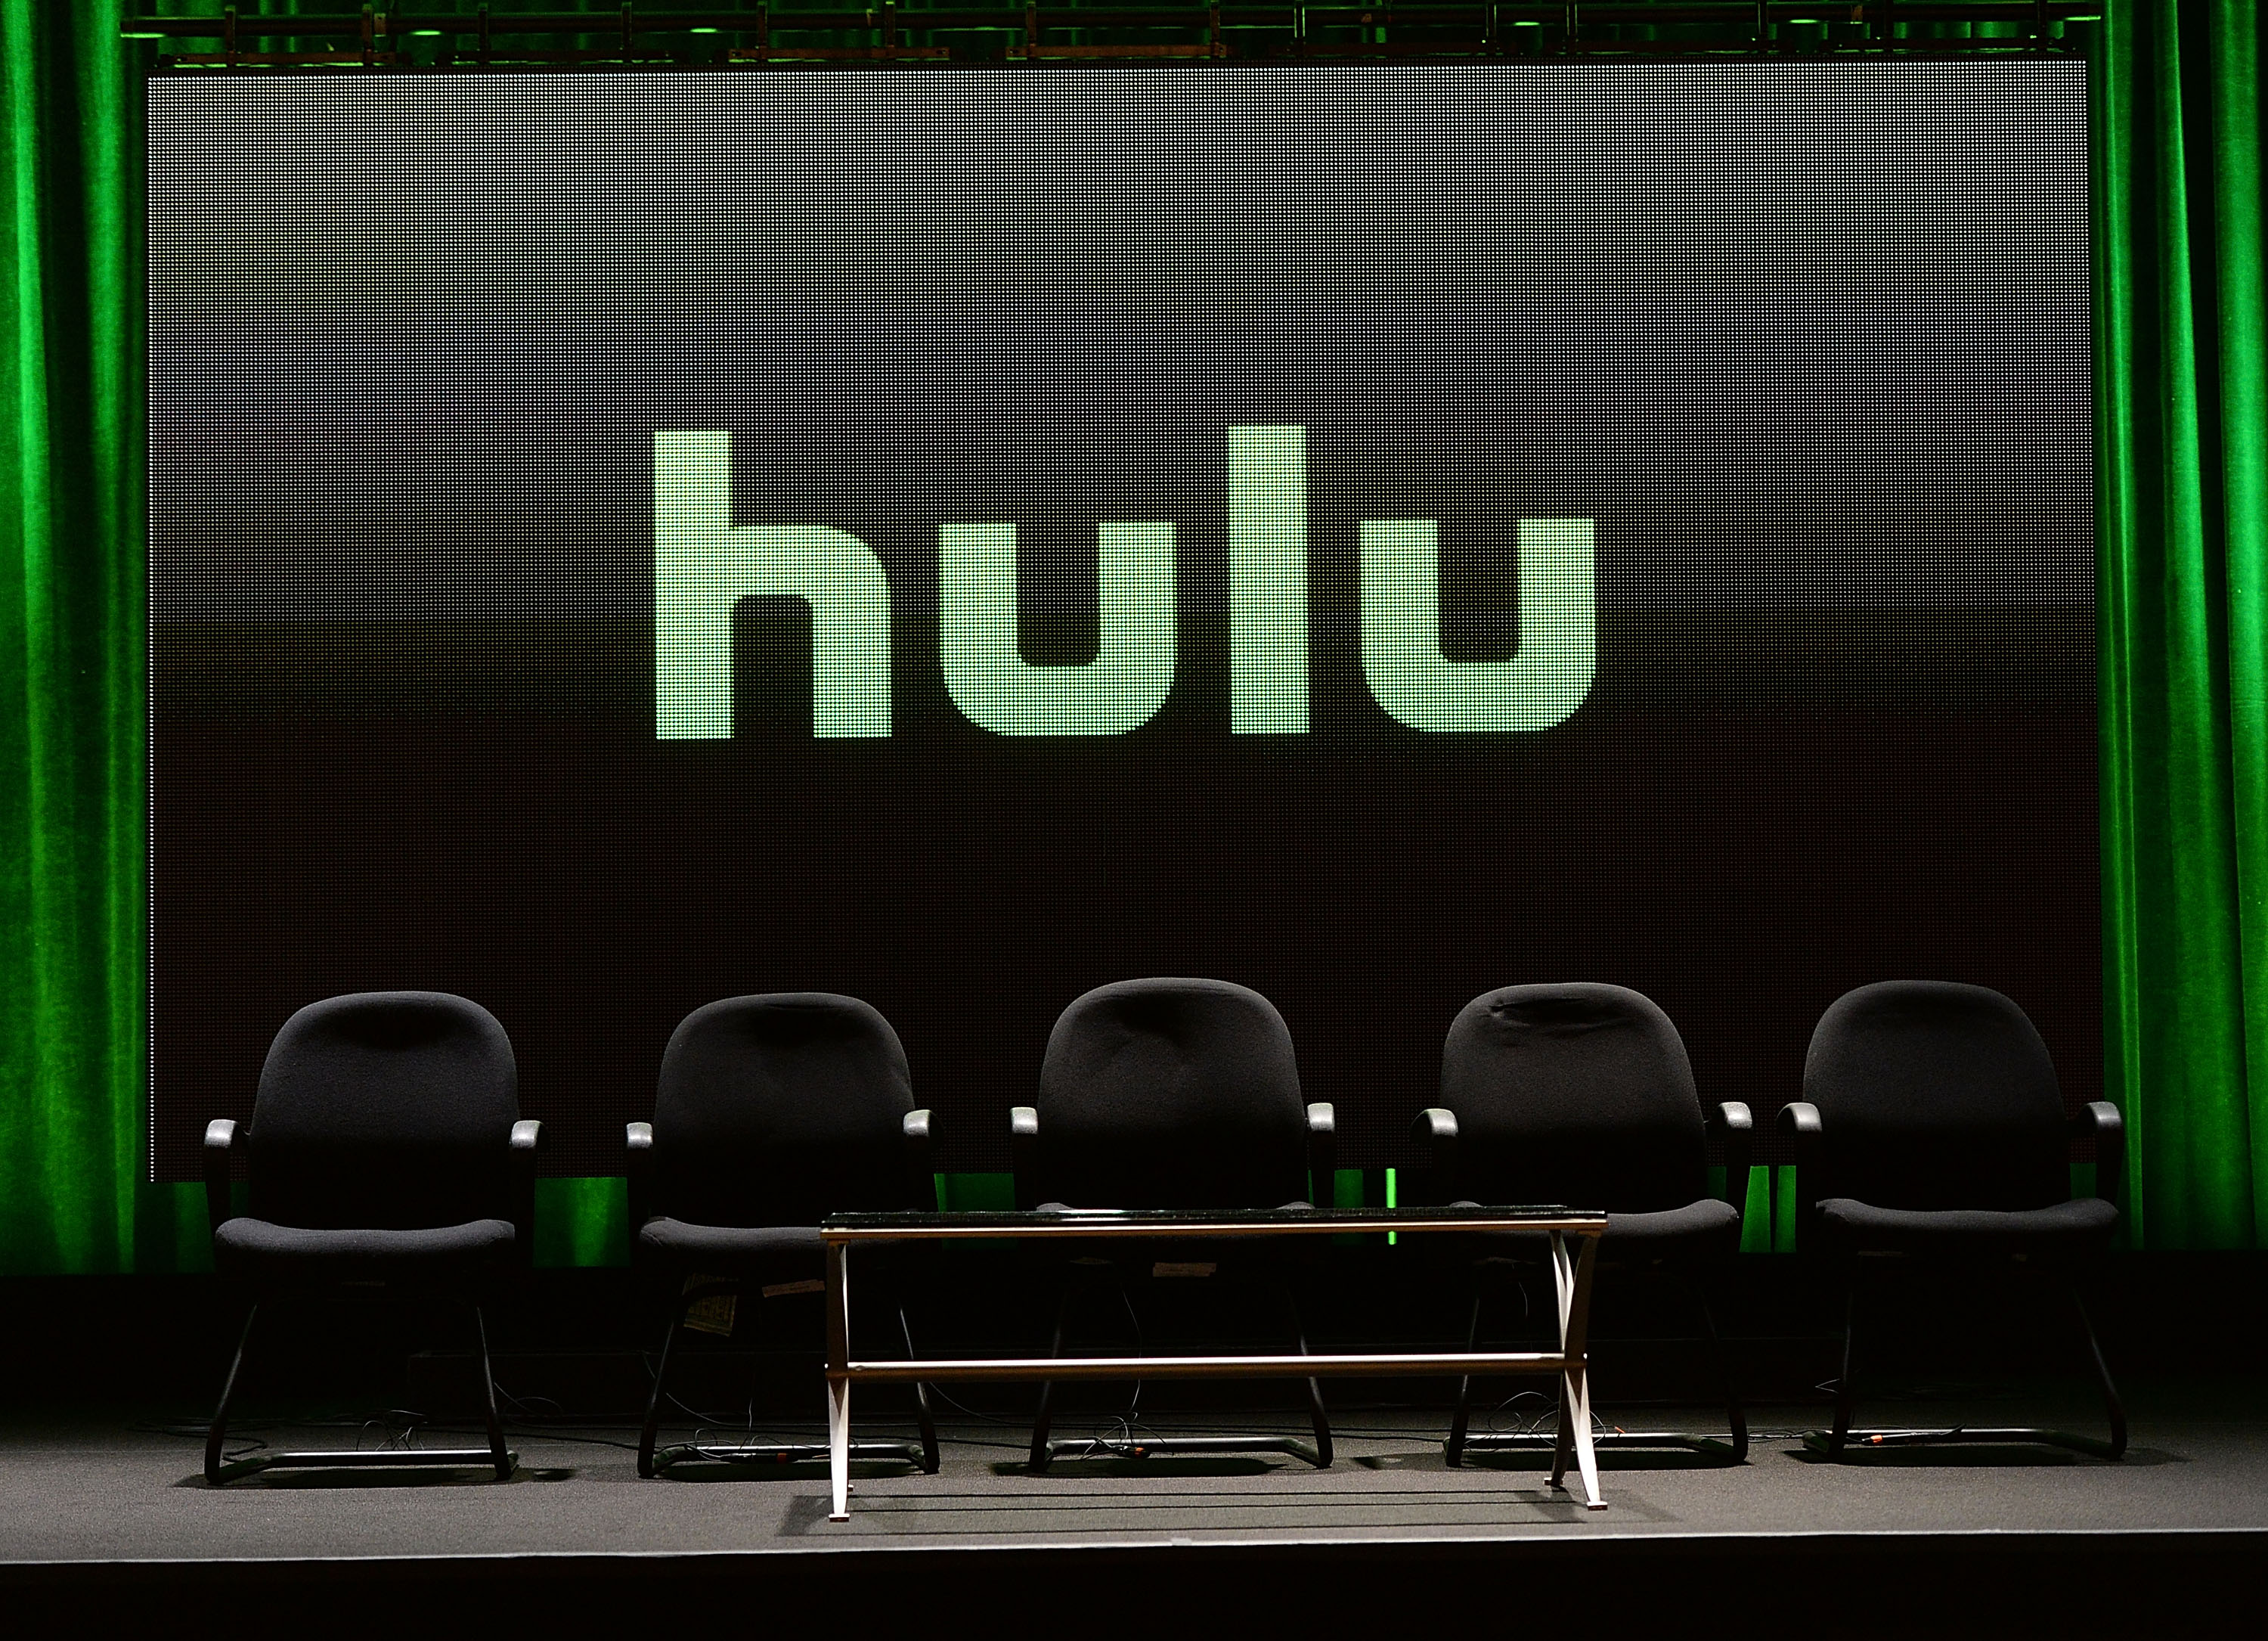 Hulu Offering Subscriptions For $1/Month